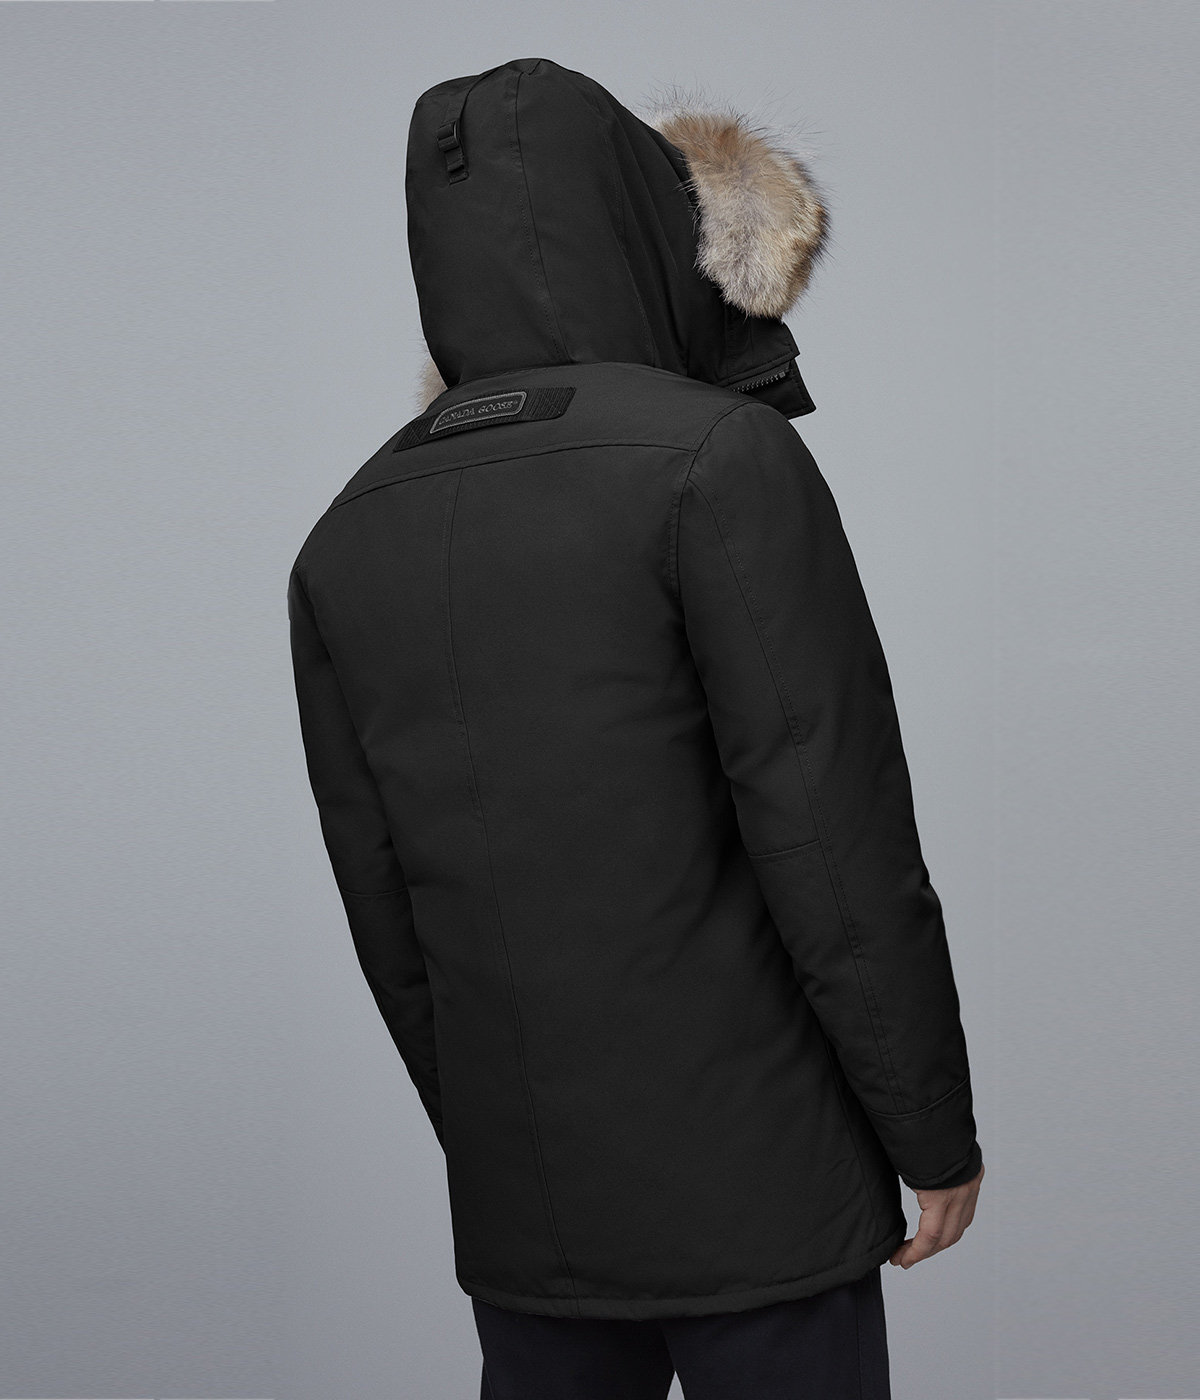 Chateau Parka Black Label Heritage | CANADA GOOSE(カナダグース